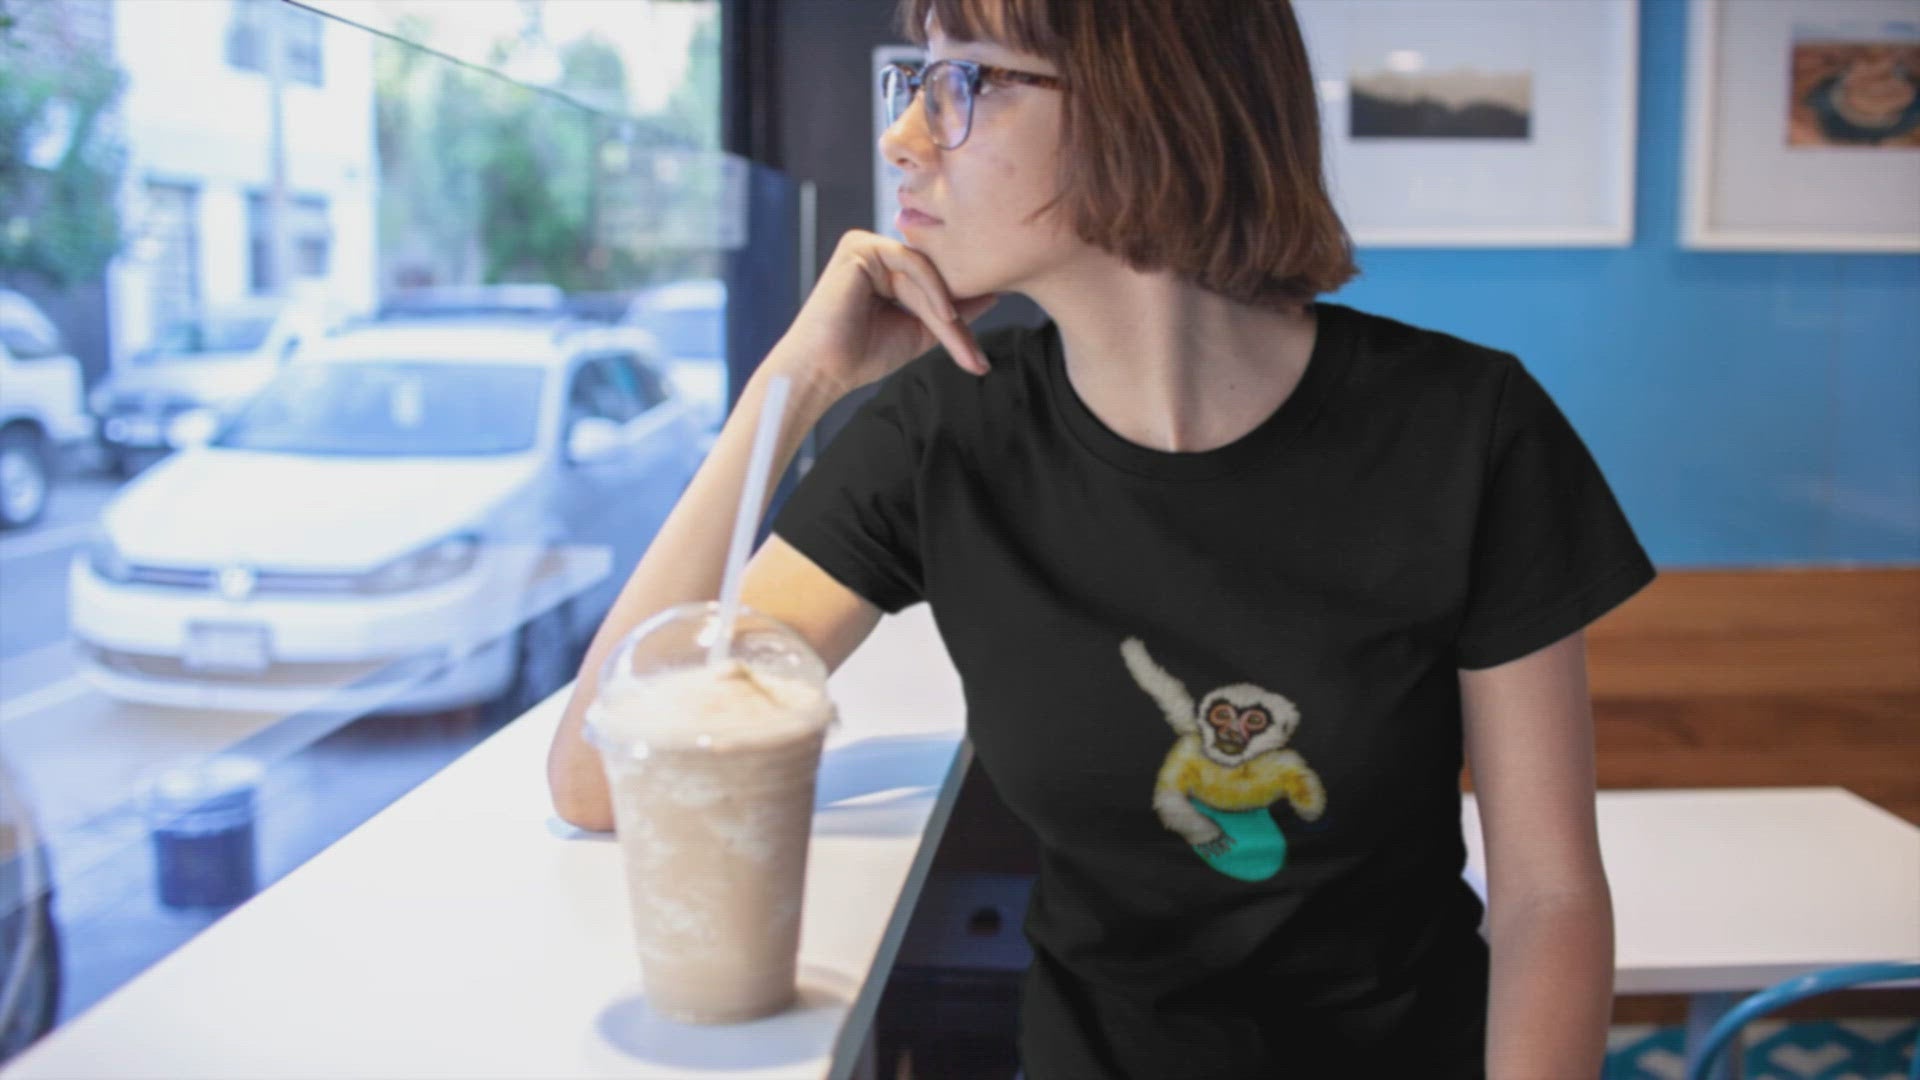 Gibbon Surfing | Women's 100% Organic Cotton T Shirt worn by woman in a cafe